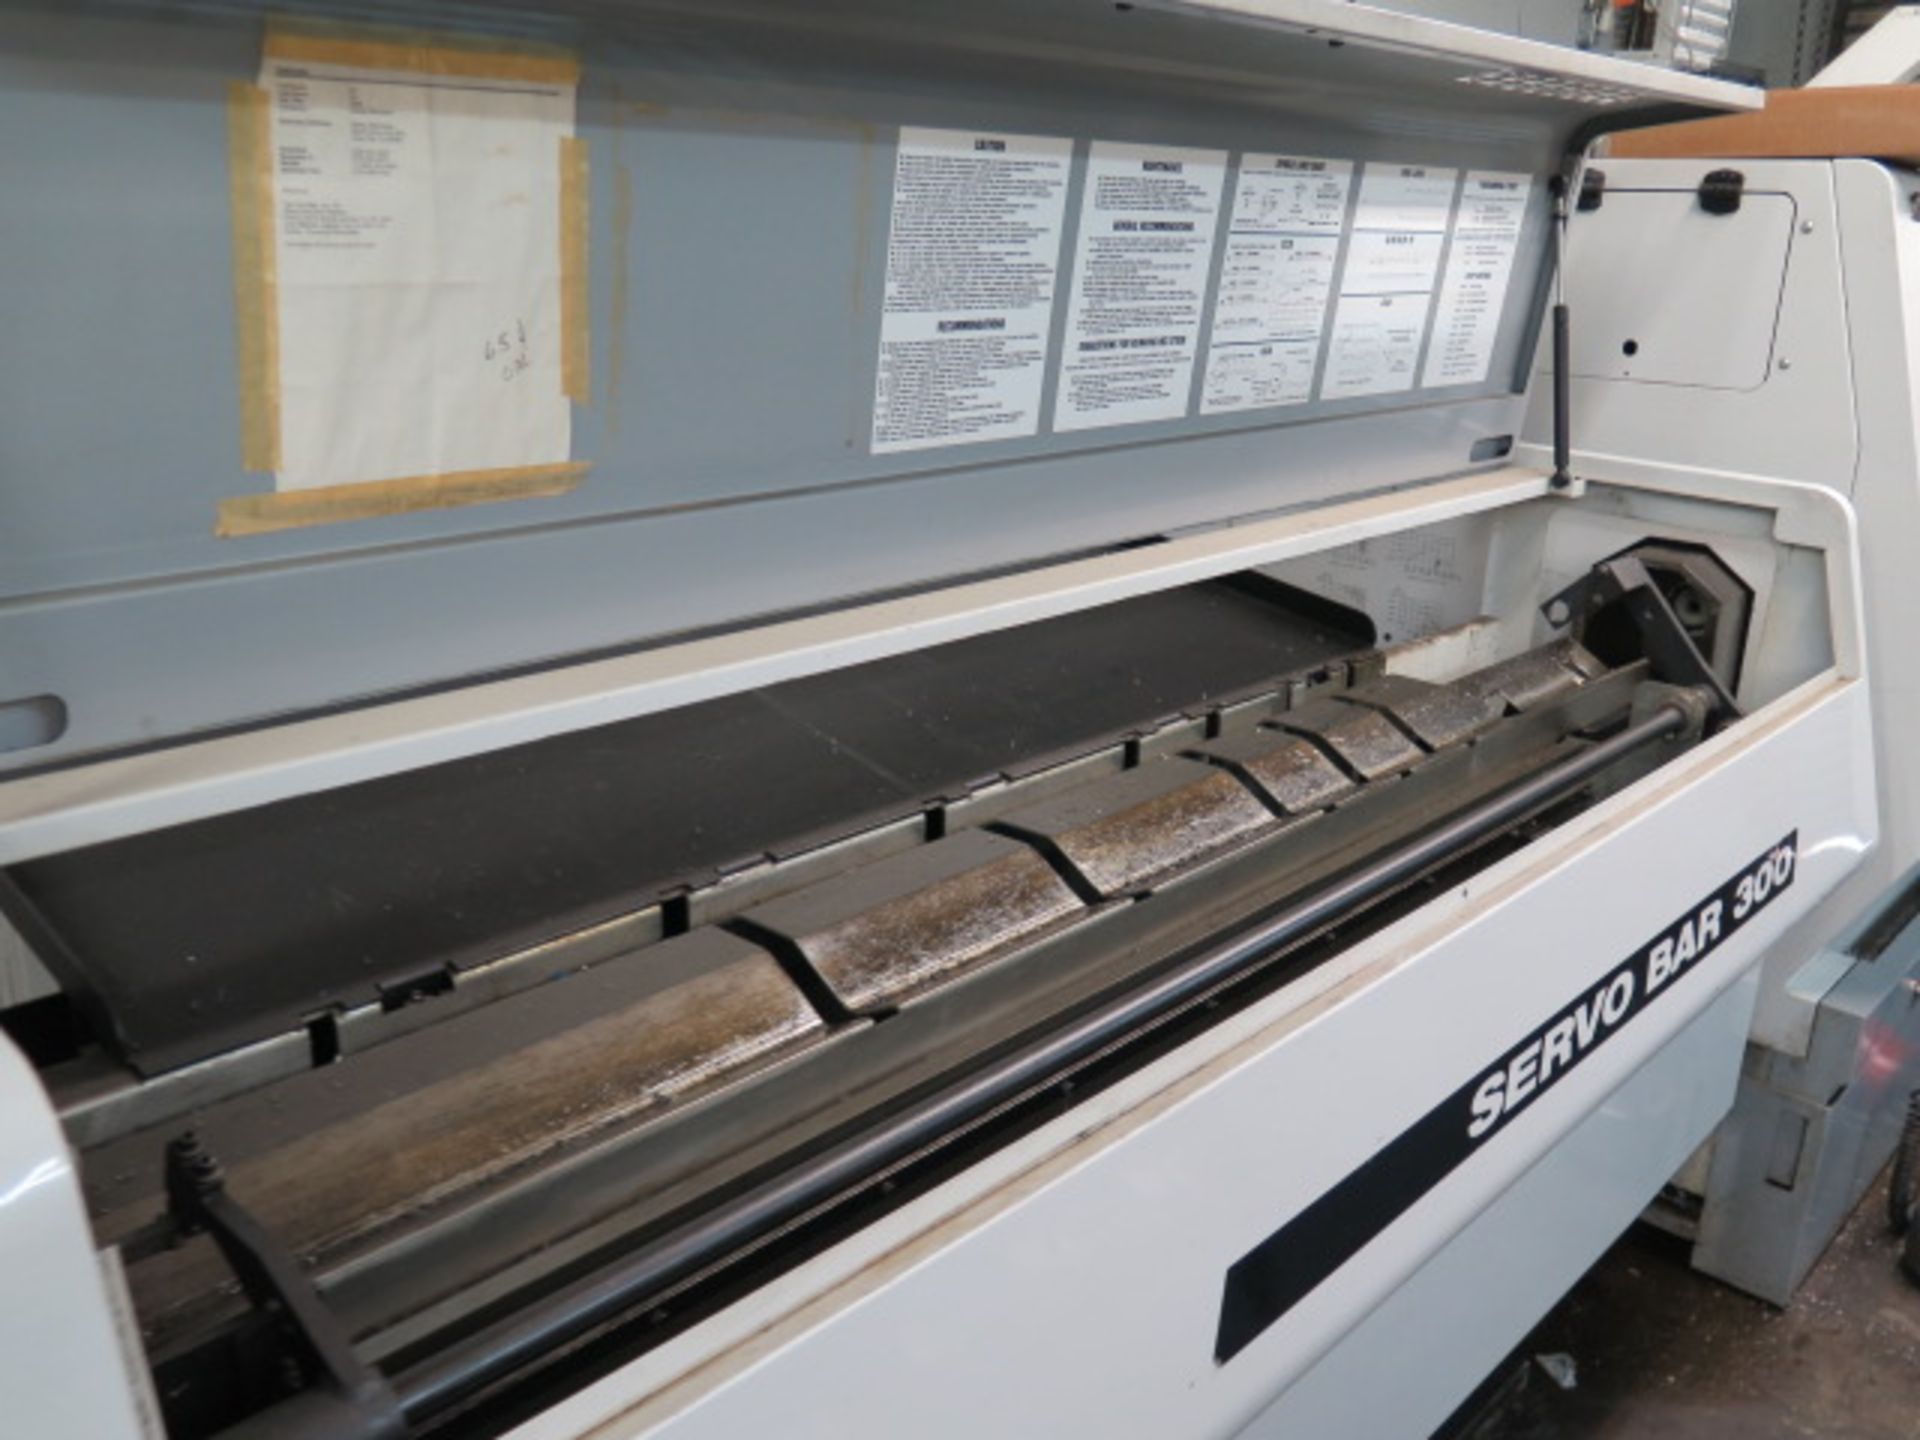 2004 Haas ServoBar 300 Automatic Bar Loader / Feeder s/n 91196 (SOLD AS-IS - NO WARRANTY) - Image 4 of 10